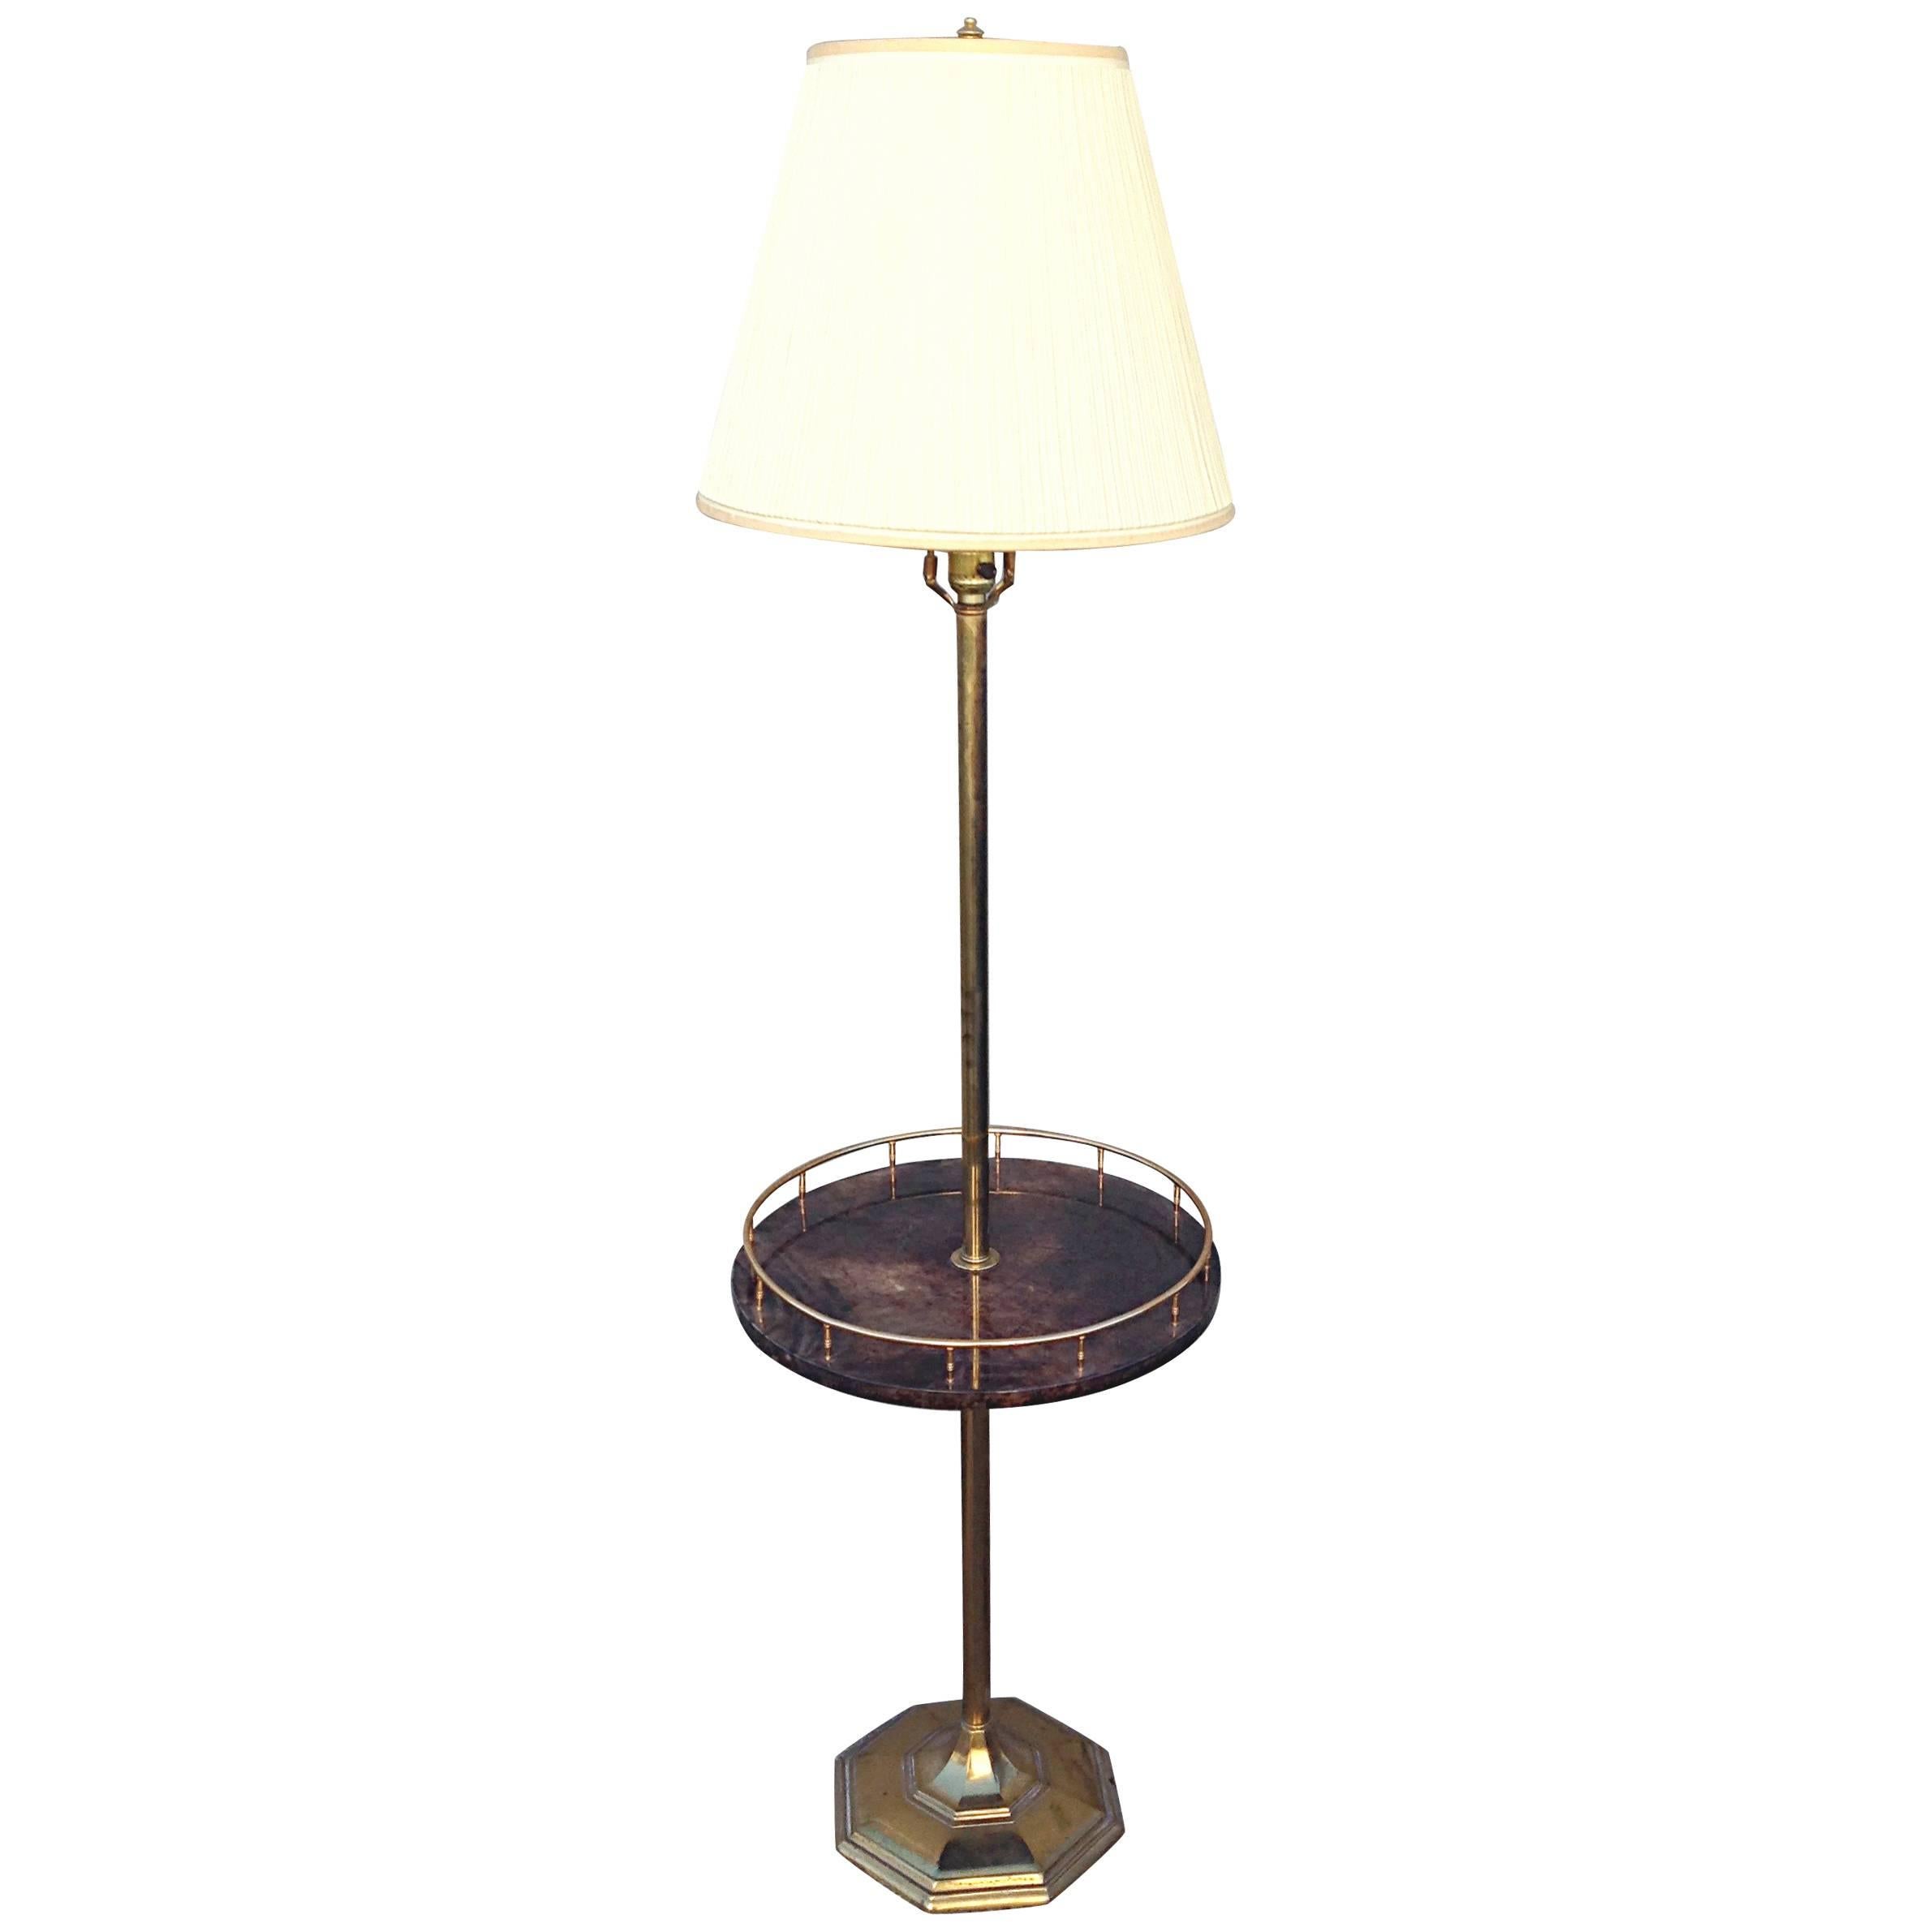 Aldo Tura Parchment and Brass Floor Lamp